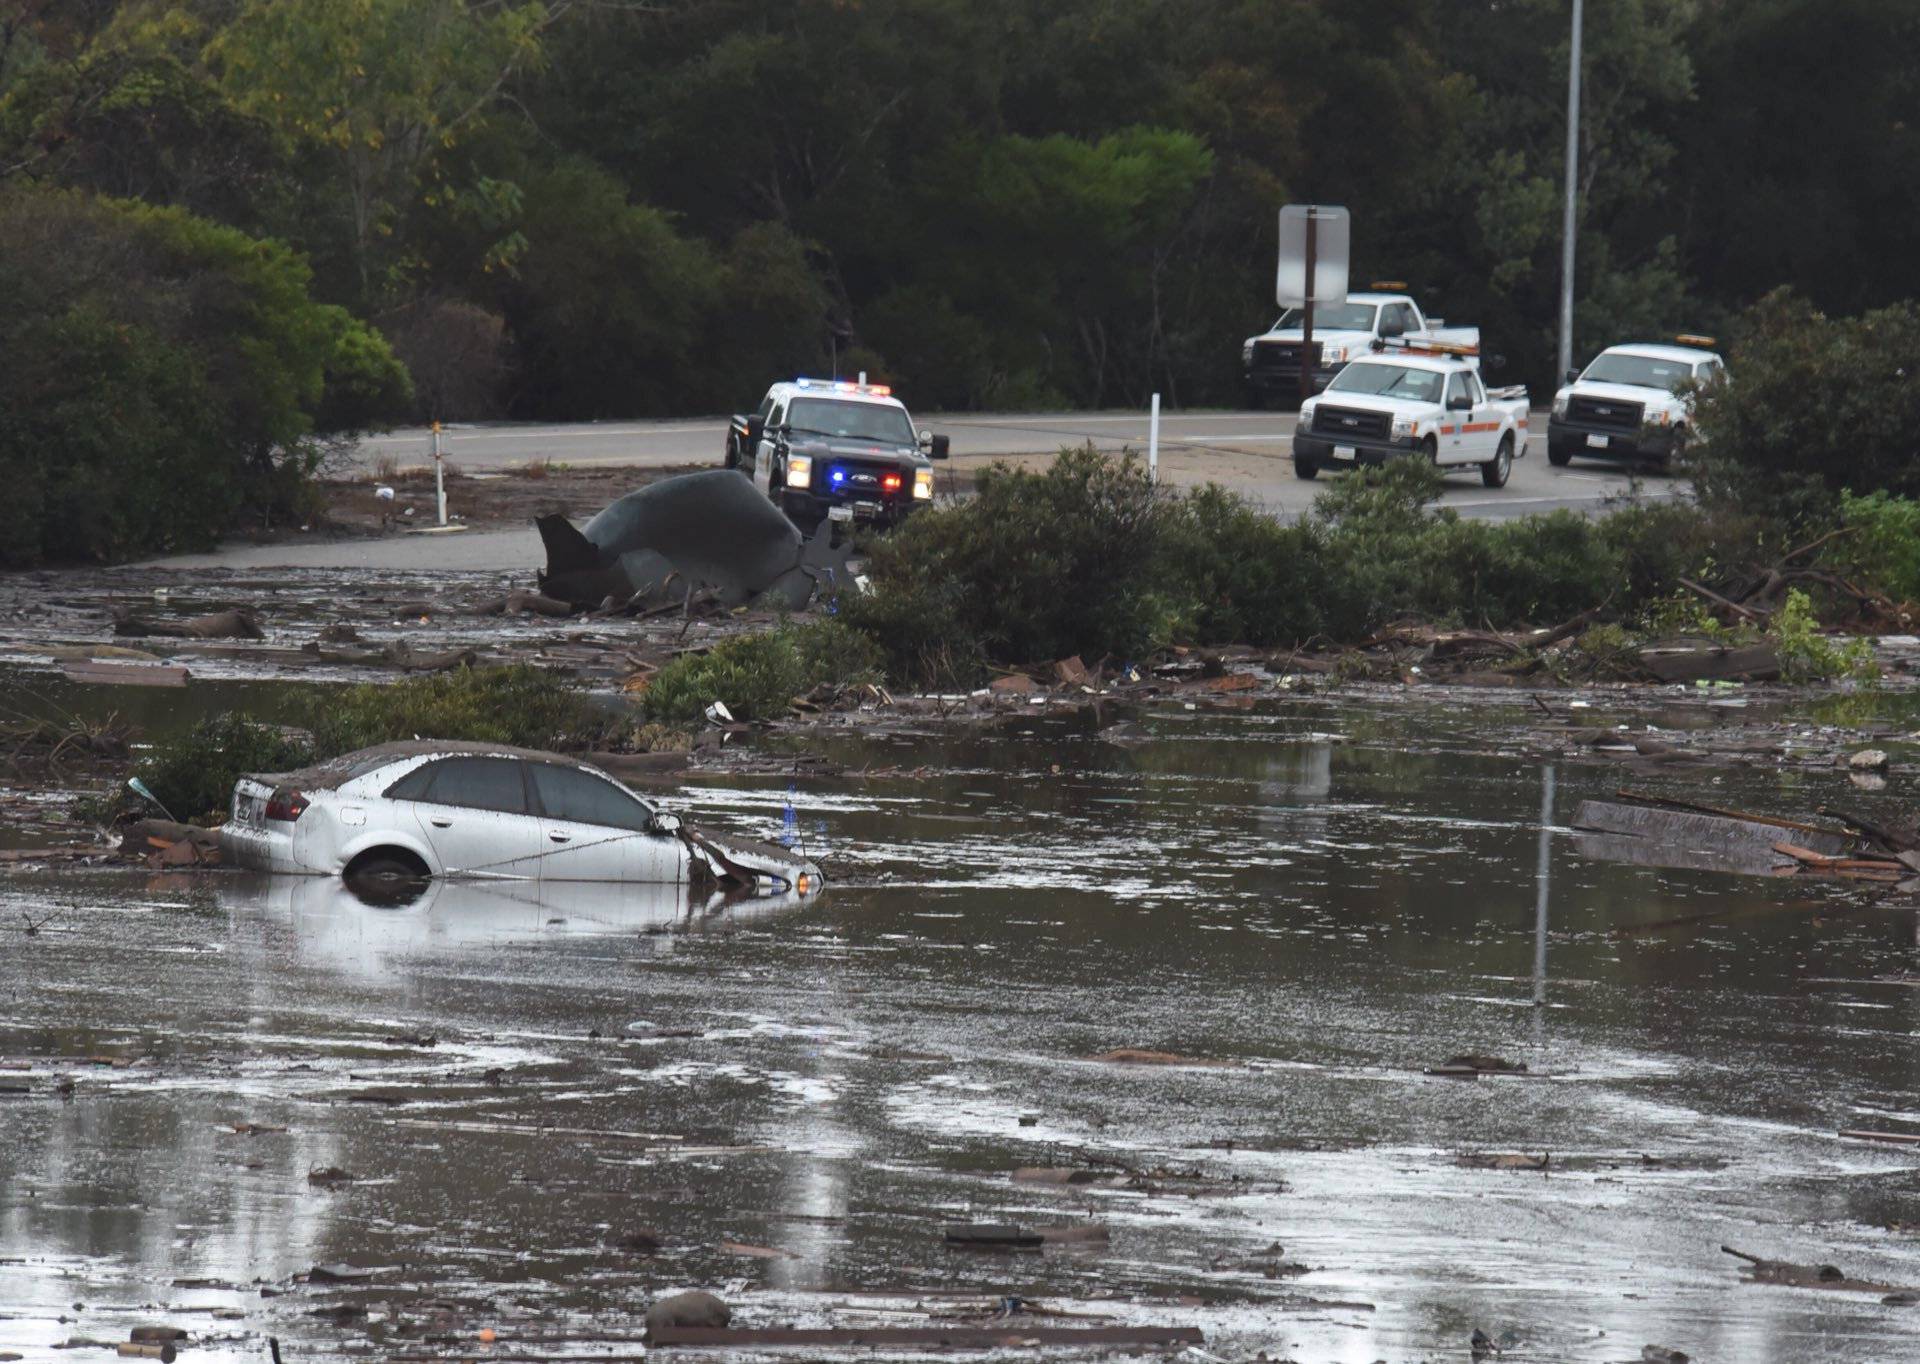 An abadoned car floats in flooded waters and debris on the freeway after a mudslide in Montecito